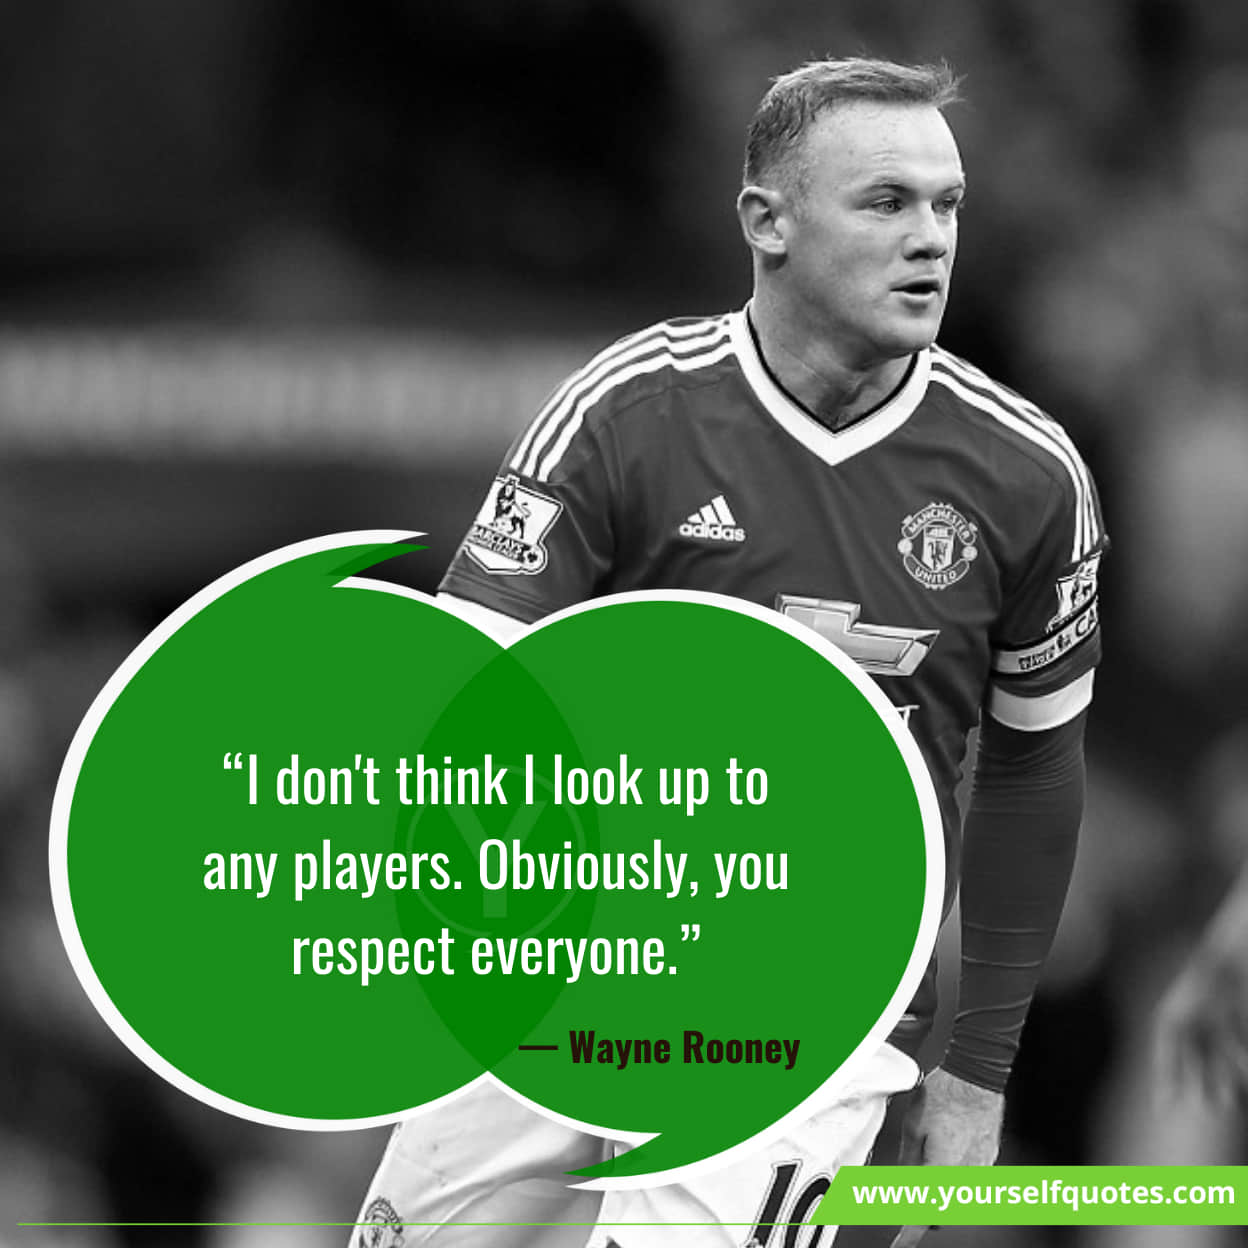 Wayne Rooney Quotes That Will Inspire You to No End